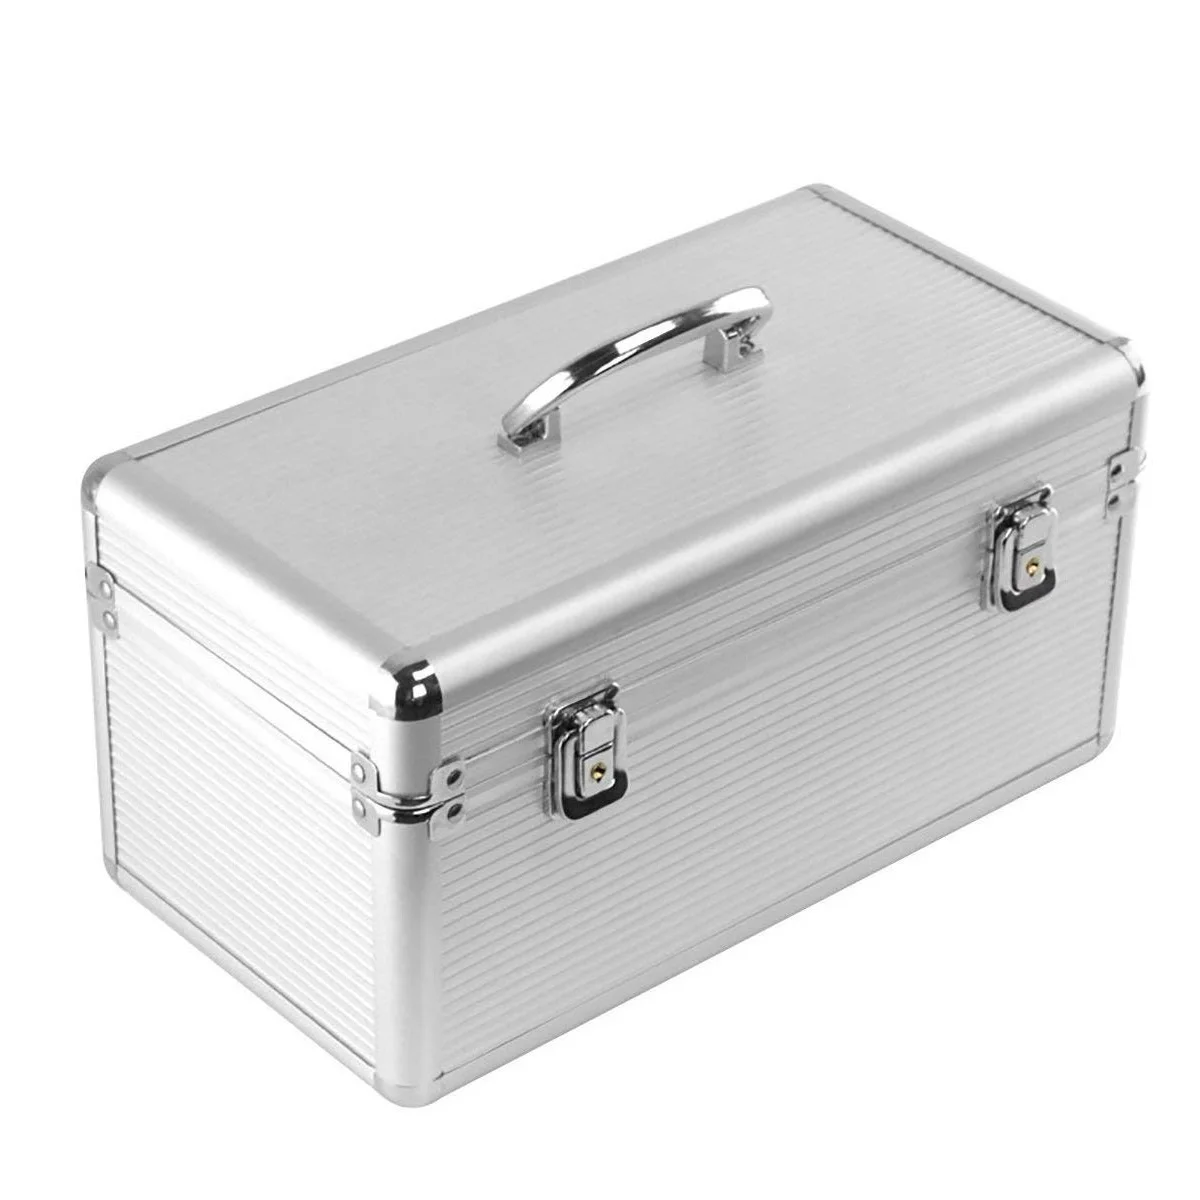 Aluminum & Eva Protection Suitcase For 8 X 3.5 & 6 X 2.5 Inch Hard Drive, Moisture Proof, Water Resistant, Static Proof